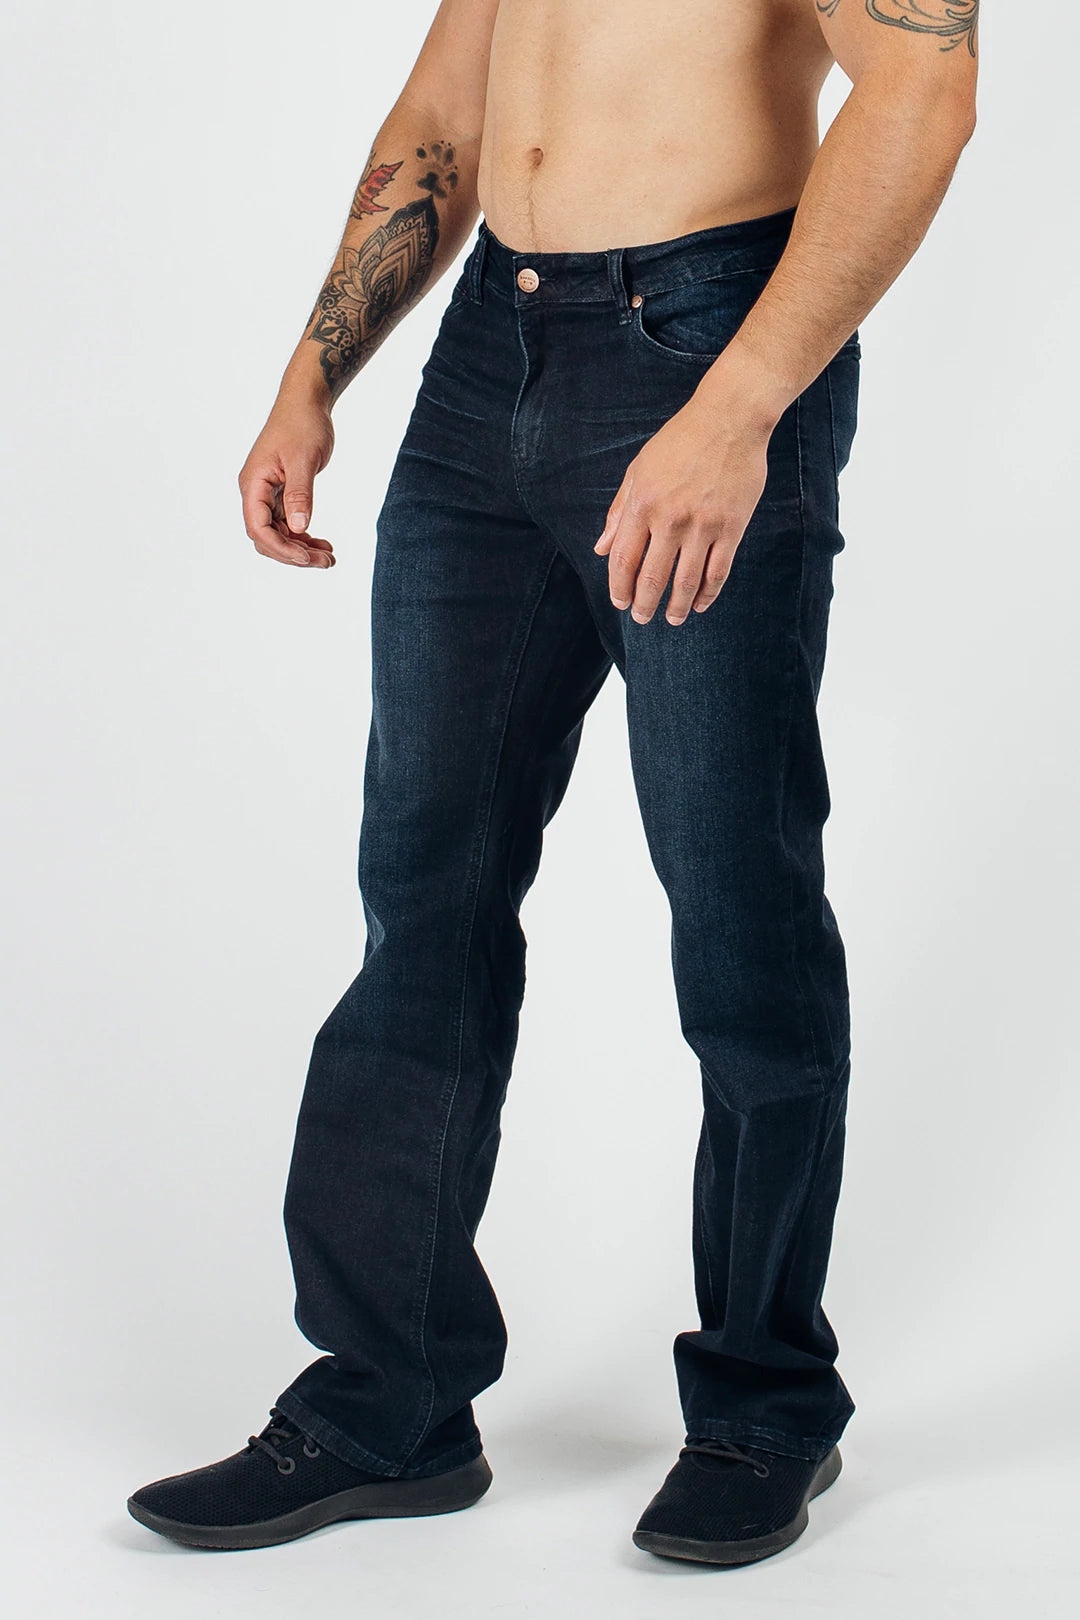 The Best Athletic Fit Jeans For Men